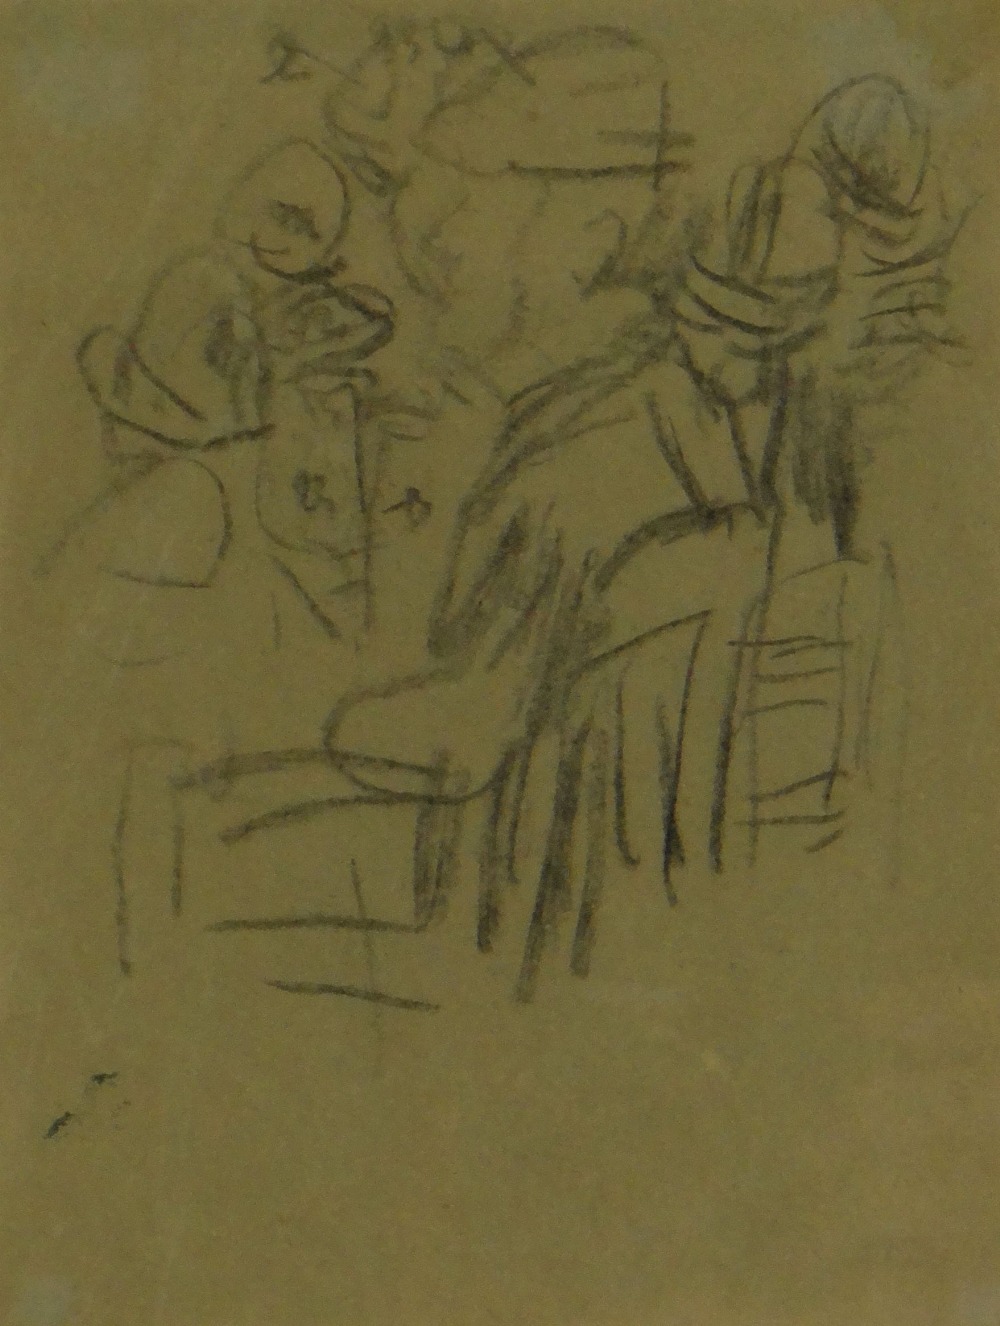 GWEN JOHN pencil on brown paper from a sketch book - Parisienne figures, entitled verso on